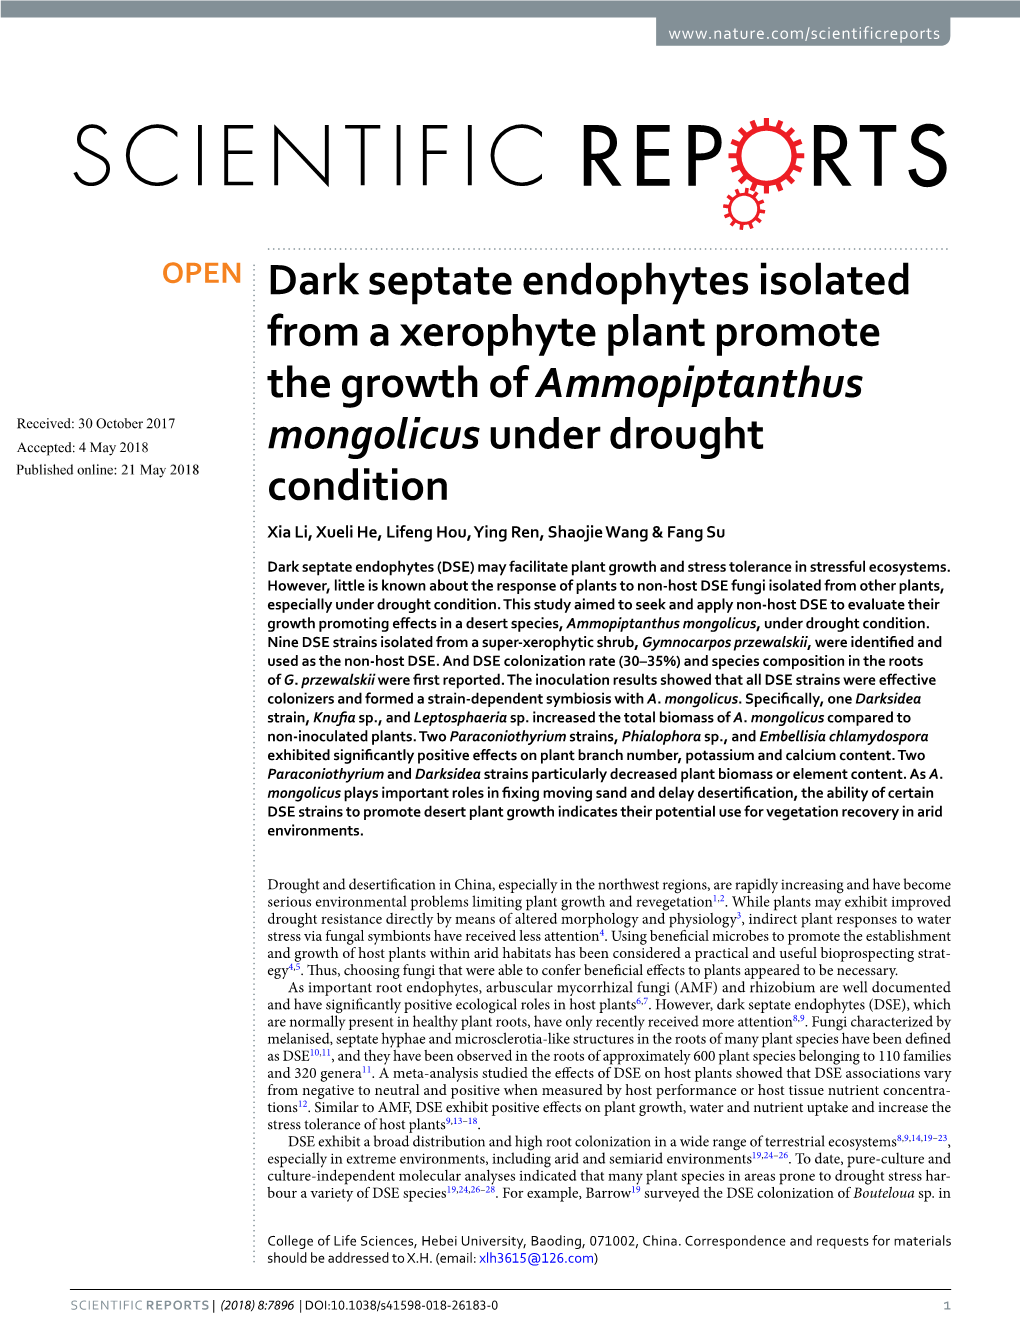 Dark Septate Endophytes Isolated from a Xerophyte Plant Promote the Growth of Ammopiptanthus Mongolicus Under Drought Condition